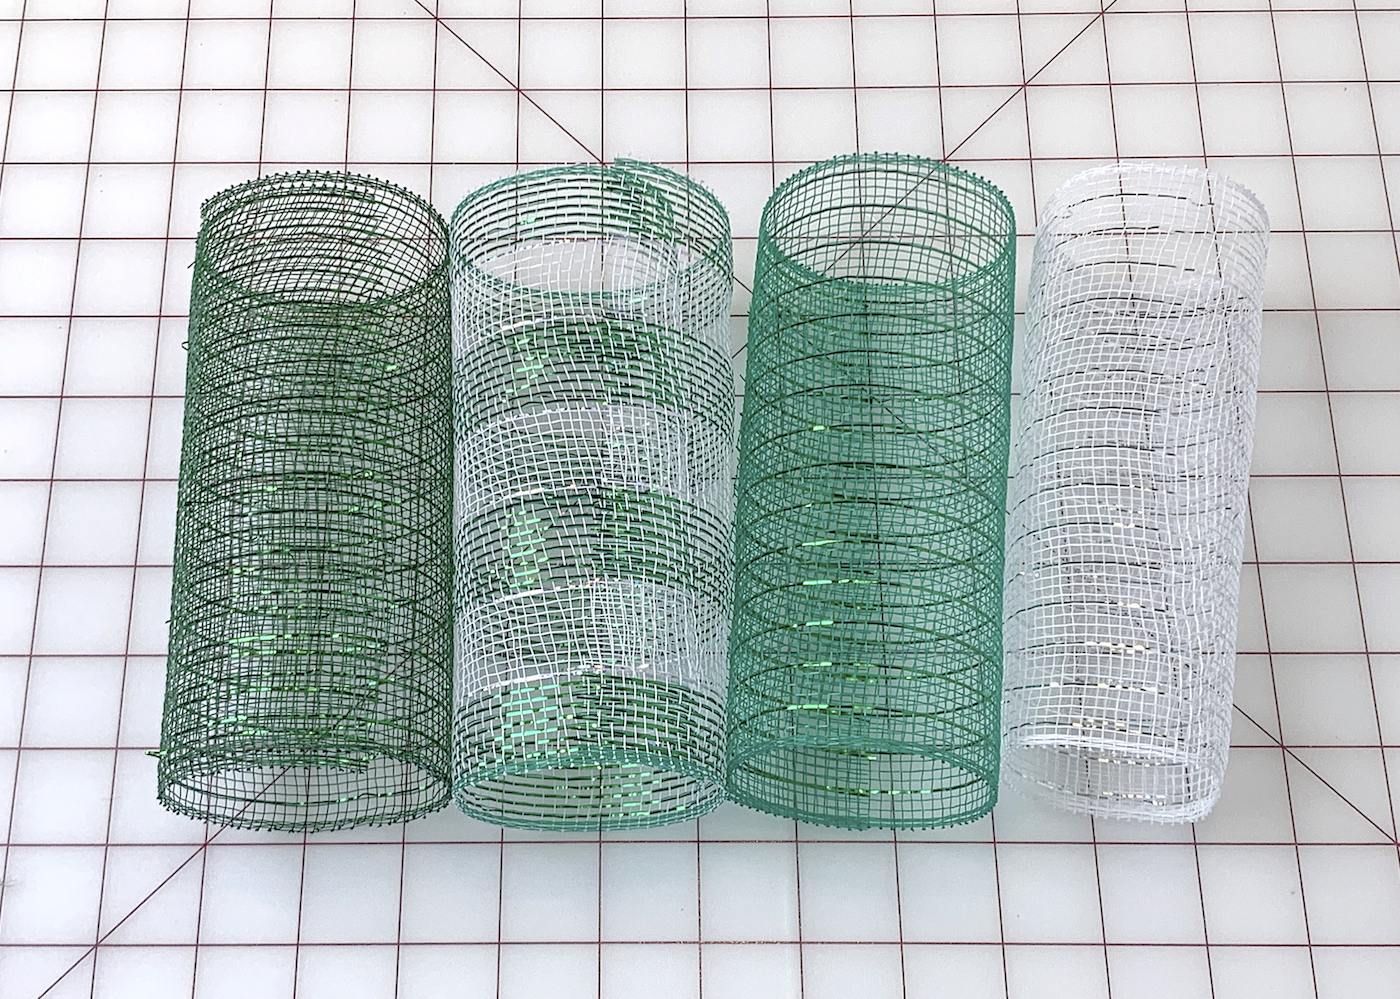 Pieces of St. Patrick's Day mesh on a cutting mat